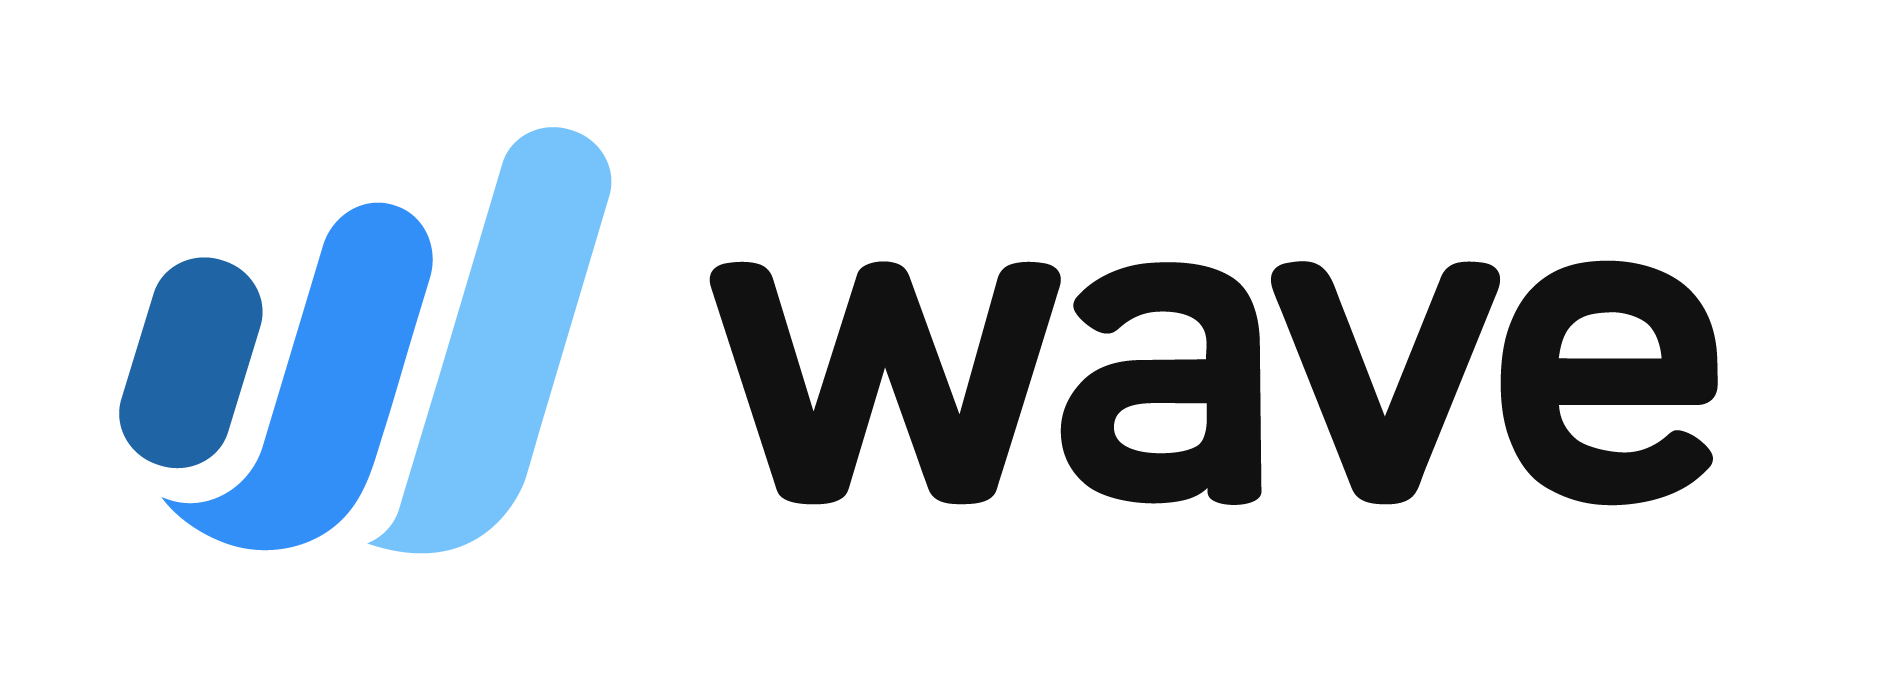 The logo for Wave